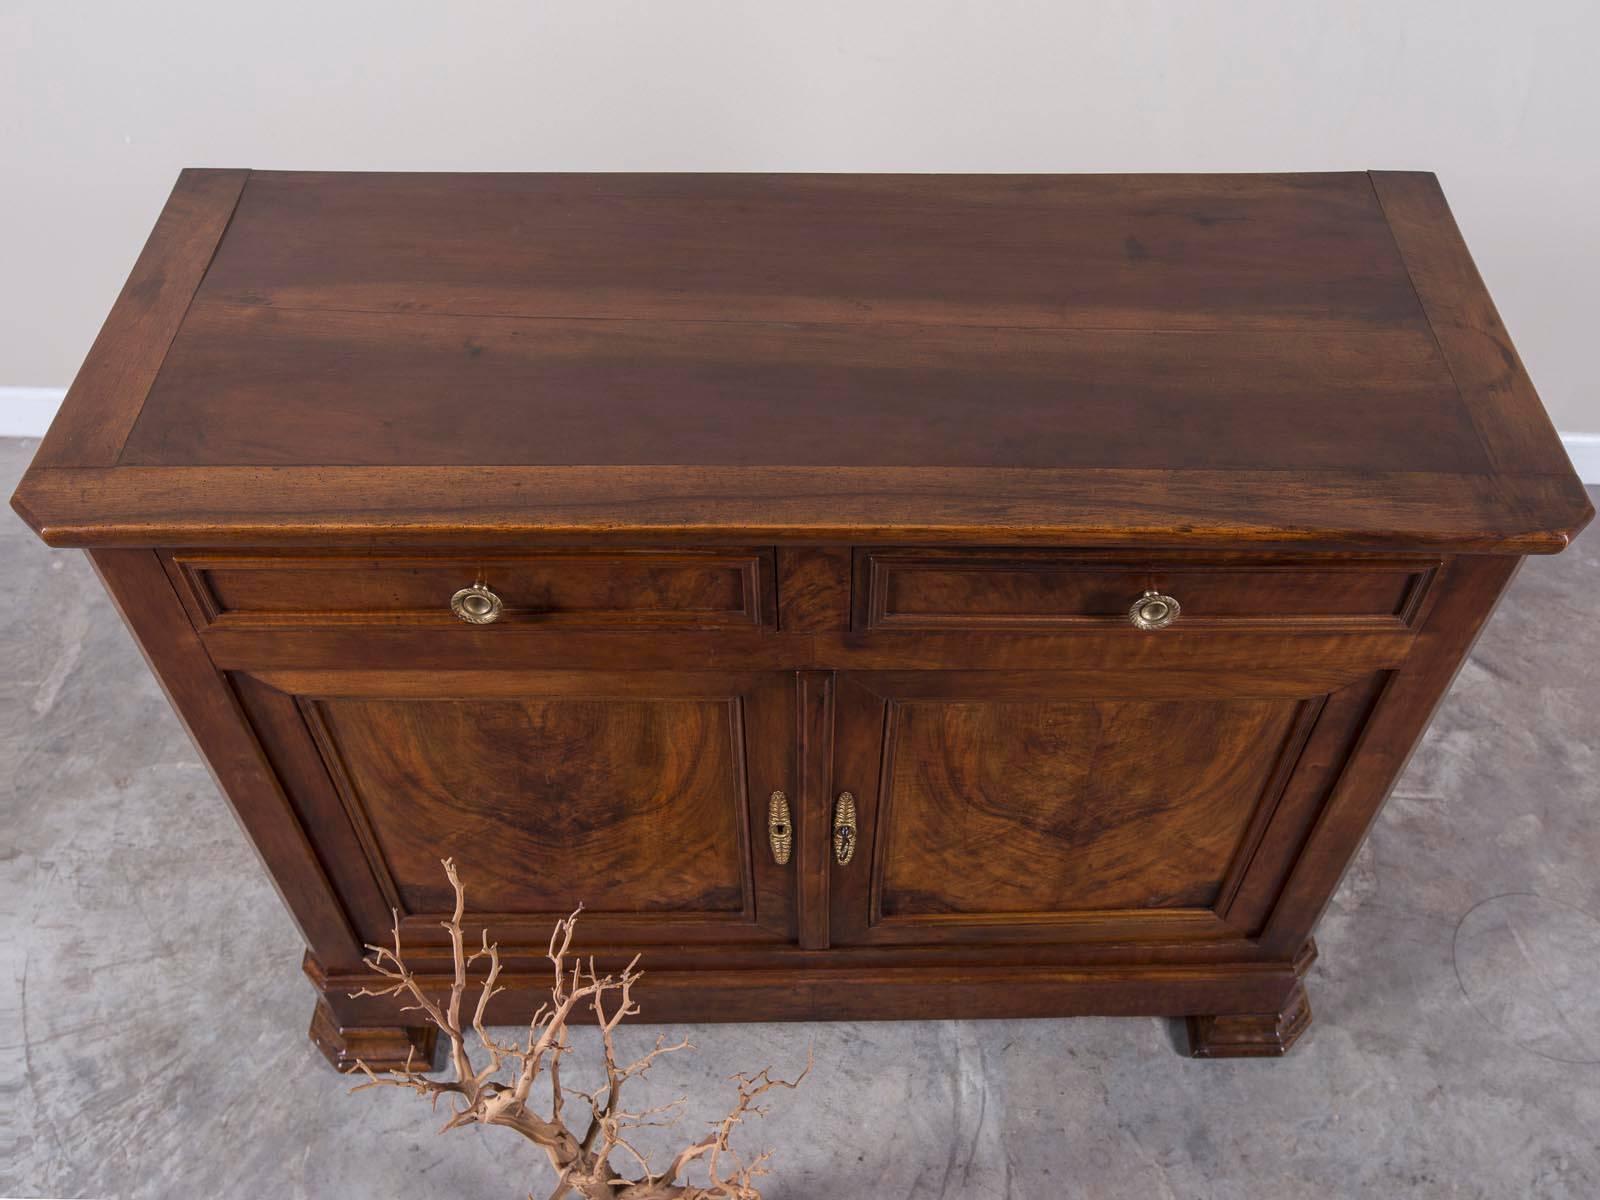 The striking walnut timber on this antique French Louis Philippe buffet circa 1850 remains as potent today as when it was first constructed. Concentrated on the cabinet doors and drawer fronts as well as the sides this timber was highly prized and